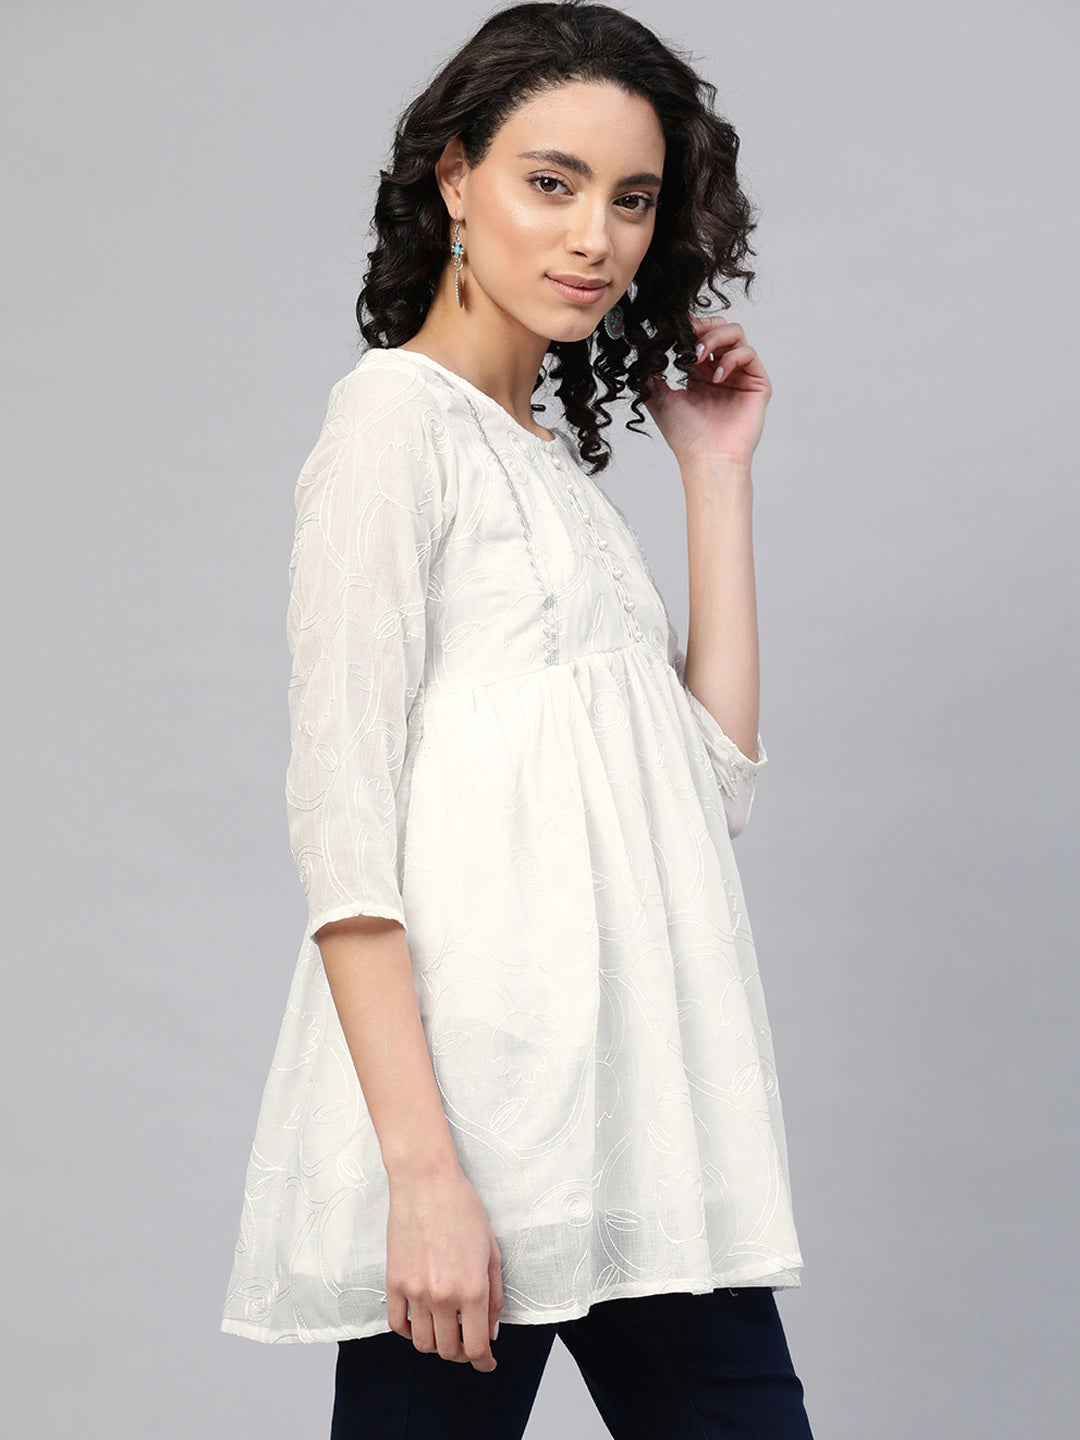 Women's Off-White Cotton Tunic By Ahalyaa (1Pc)